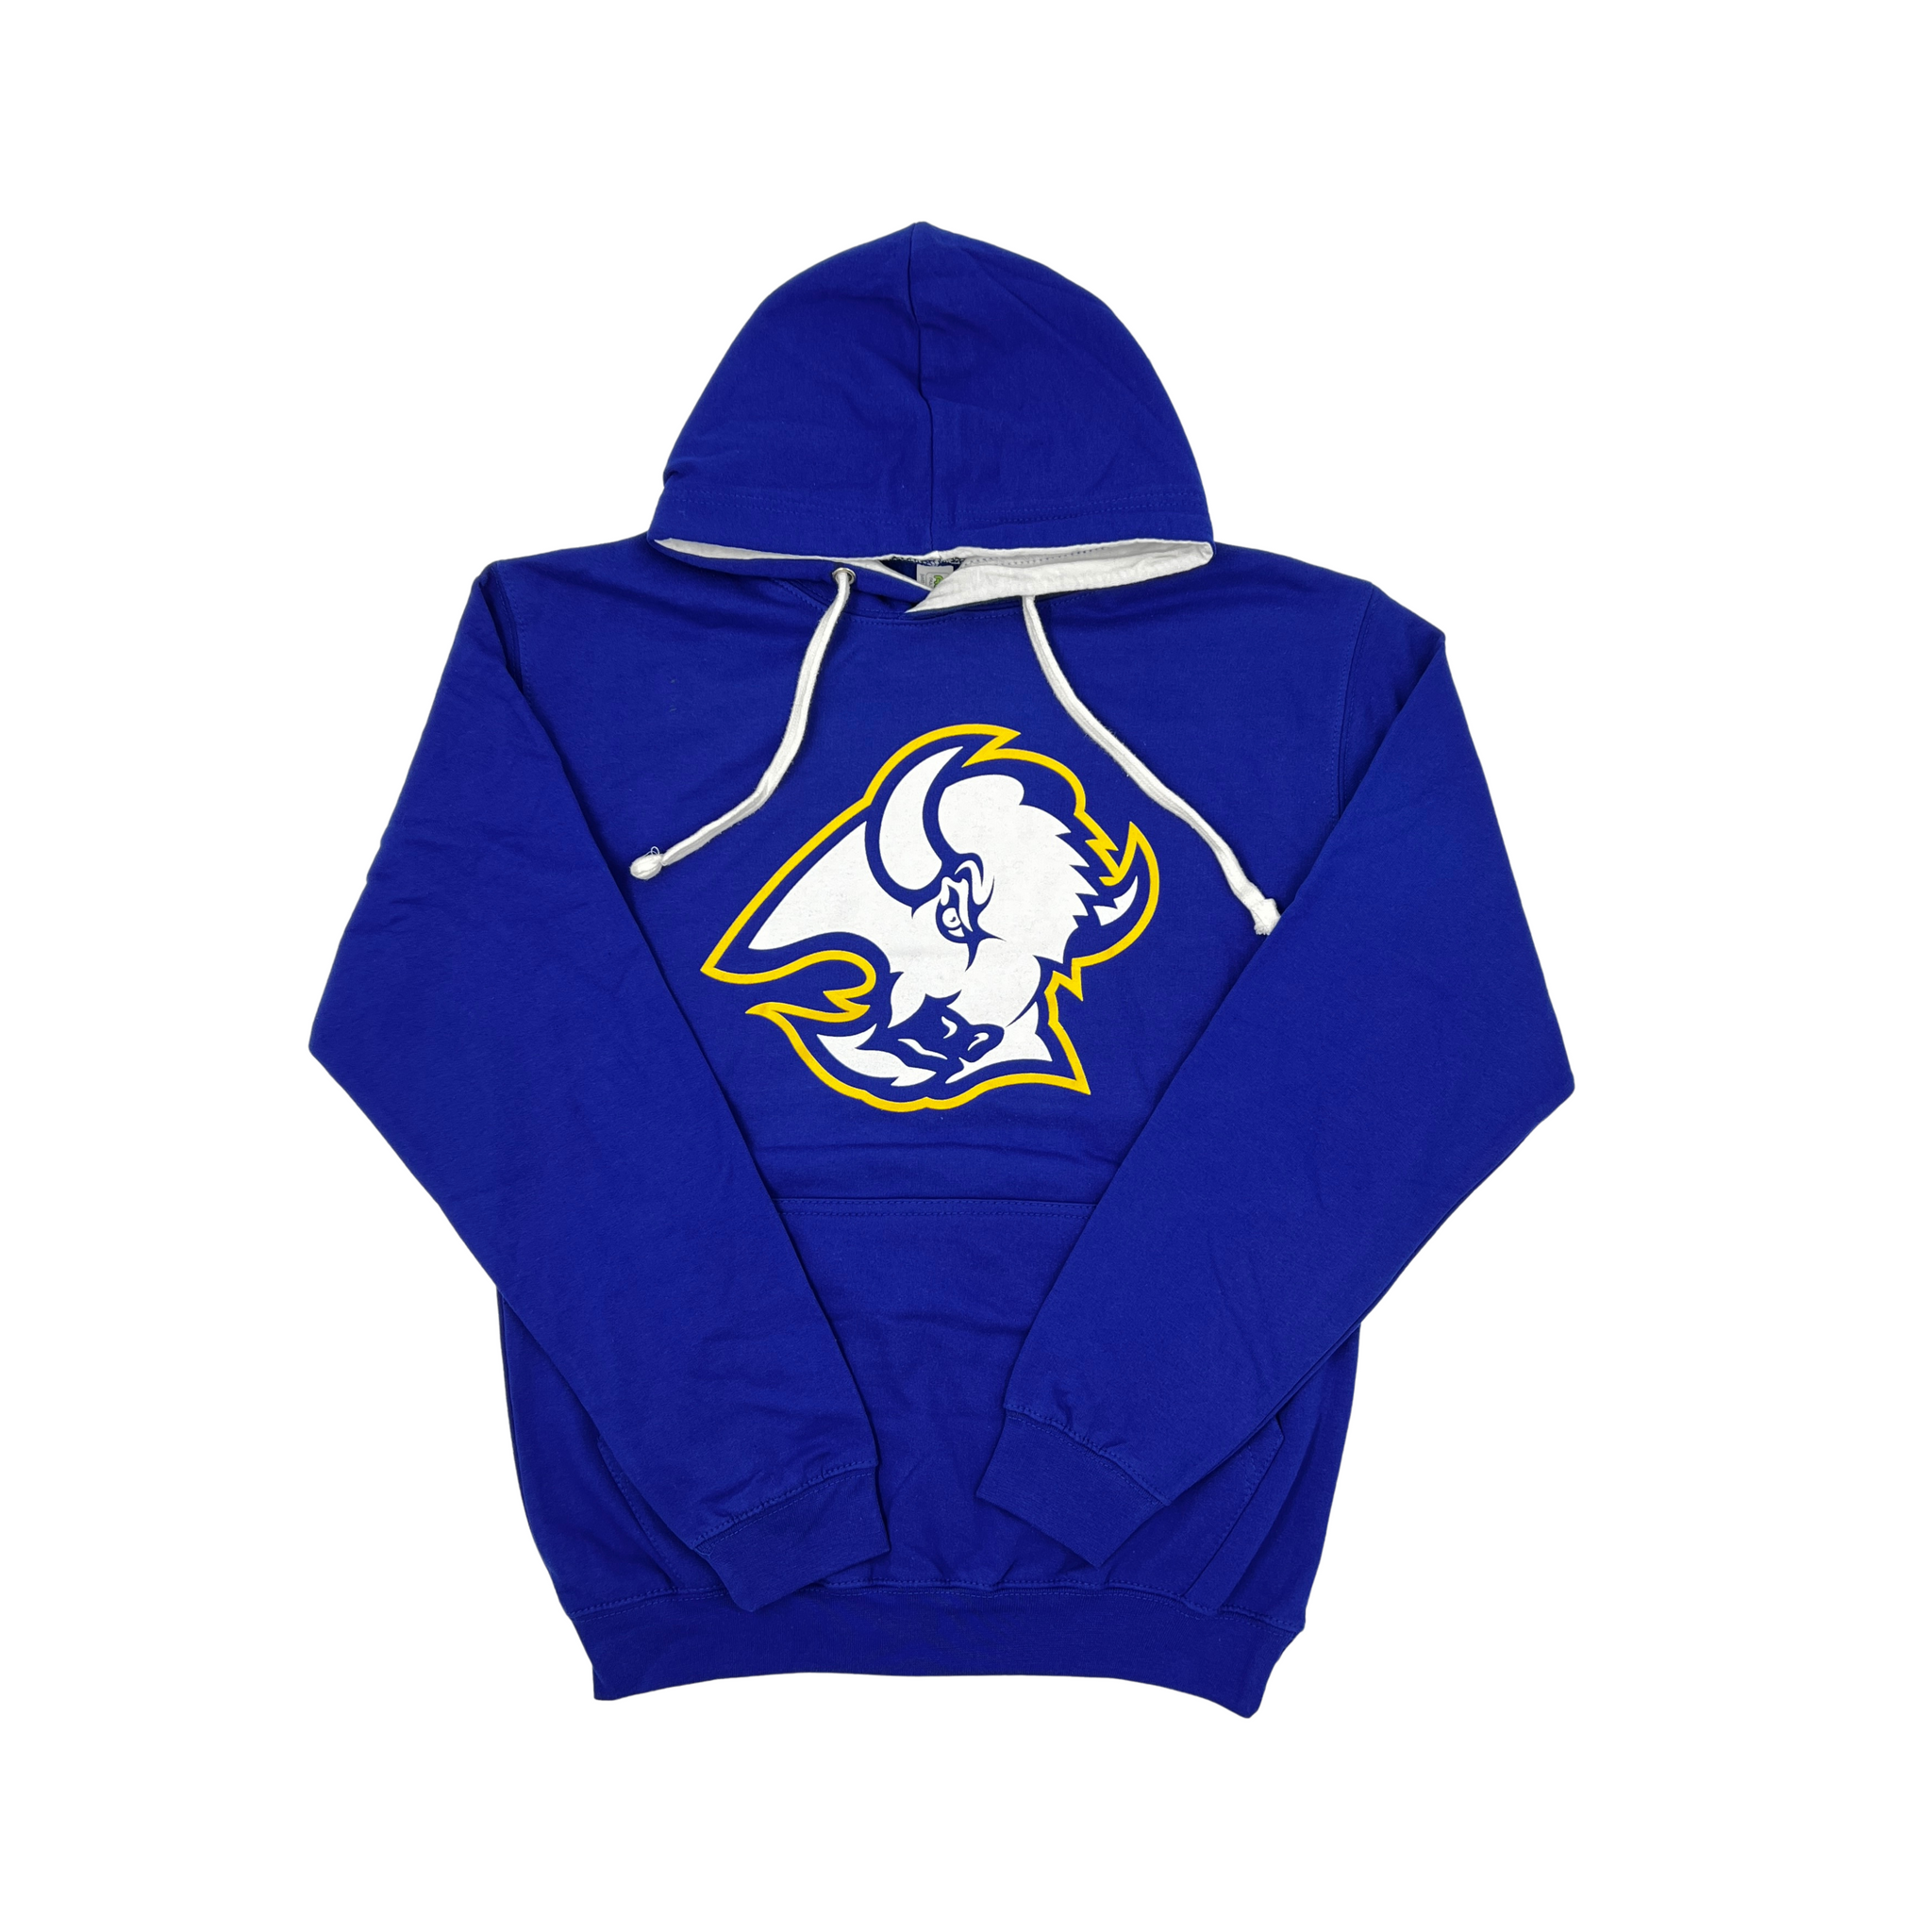 The BFLO Store - Have your kids cheer on the Buffalo Sabres while